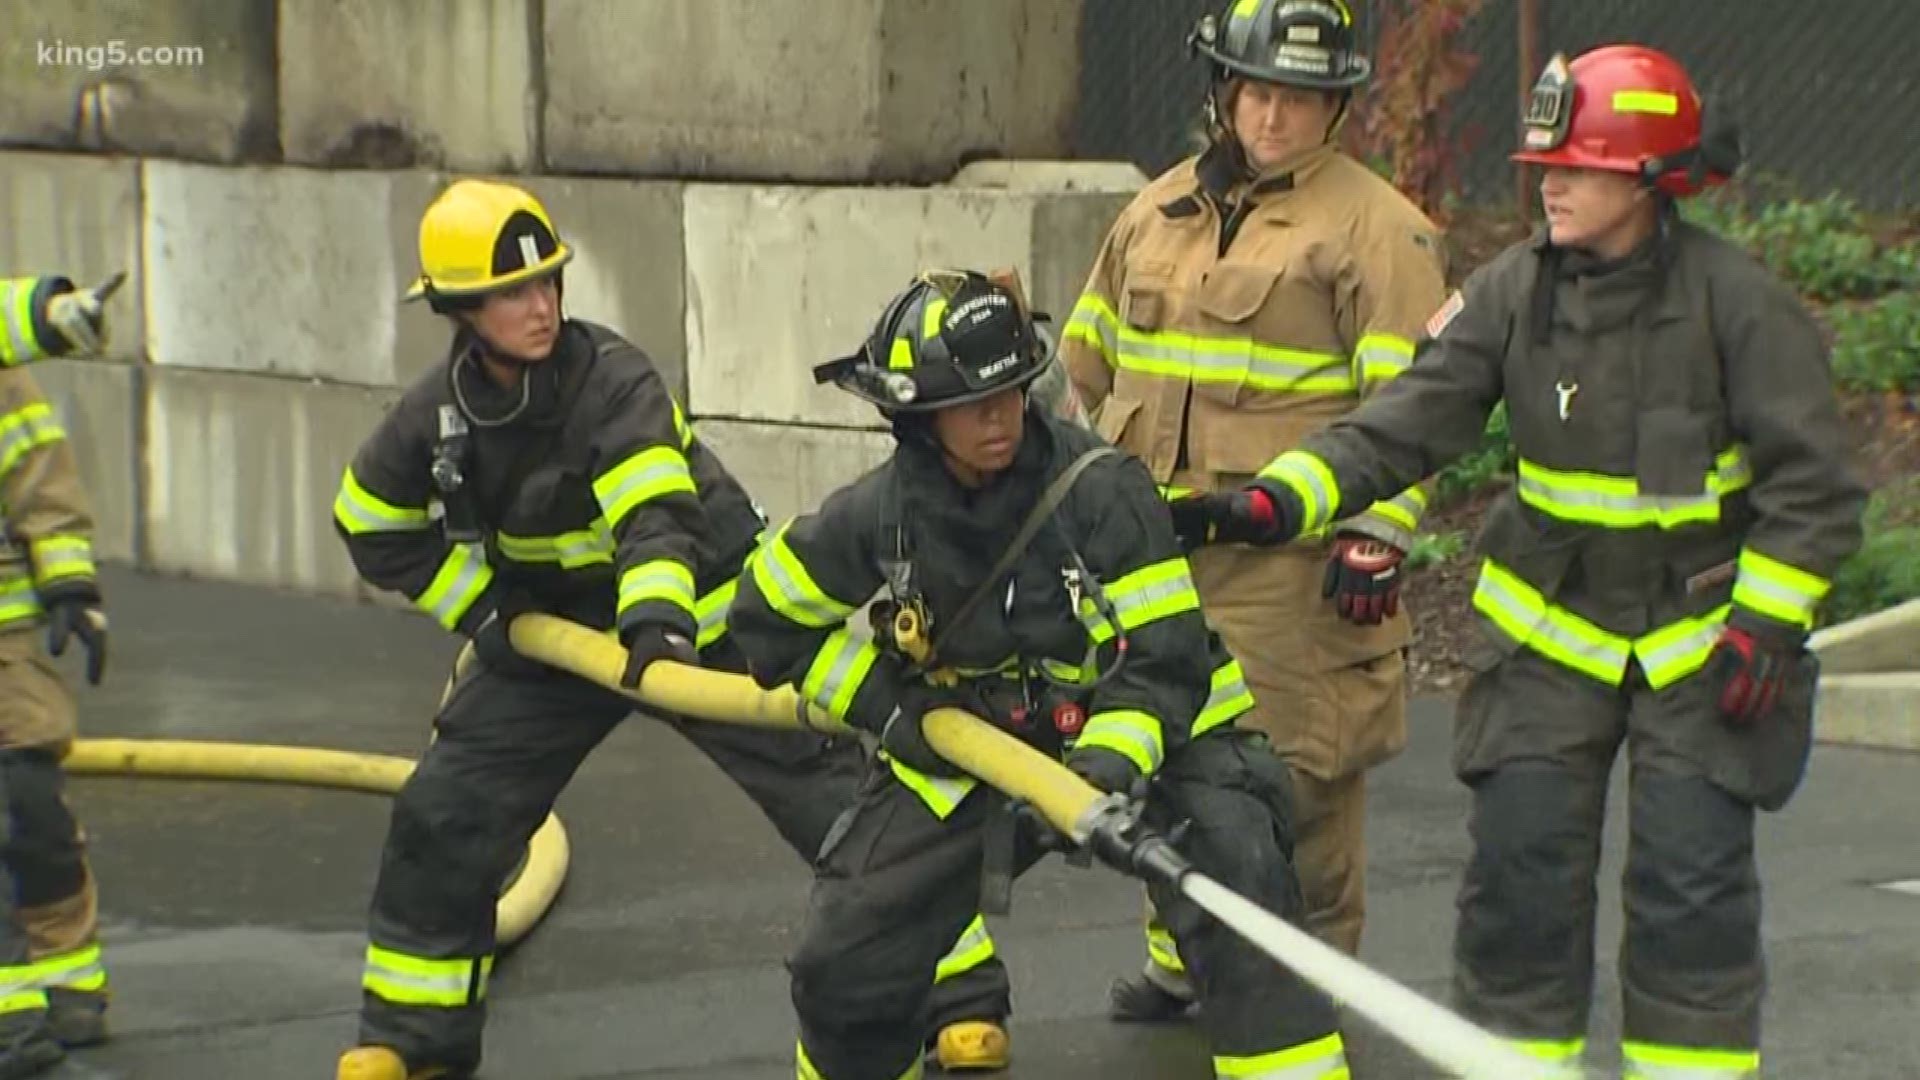 Female firefighters gathered Sunday to network and train with other women. KING 5's Amy Moreno reports.